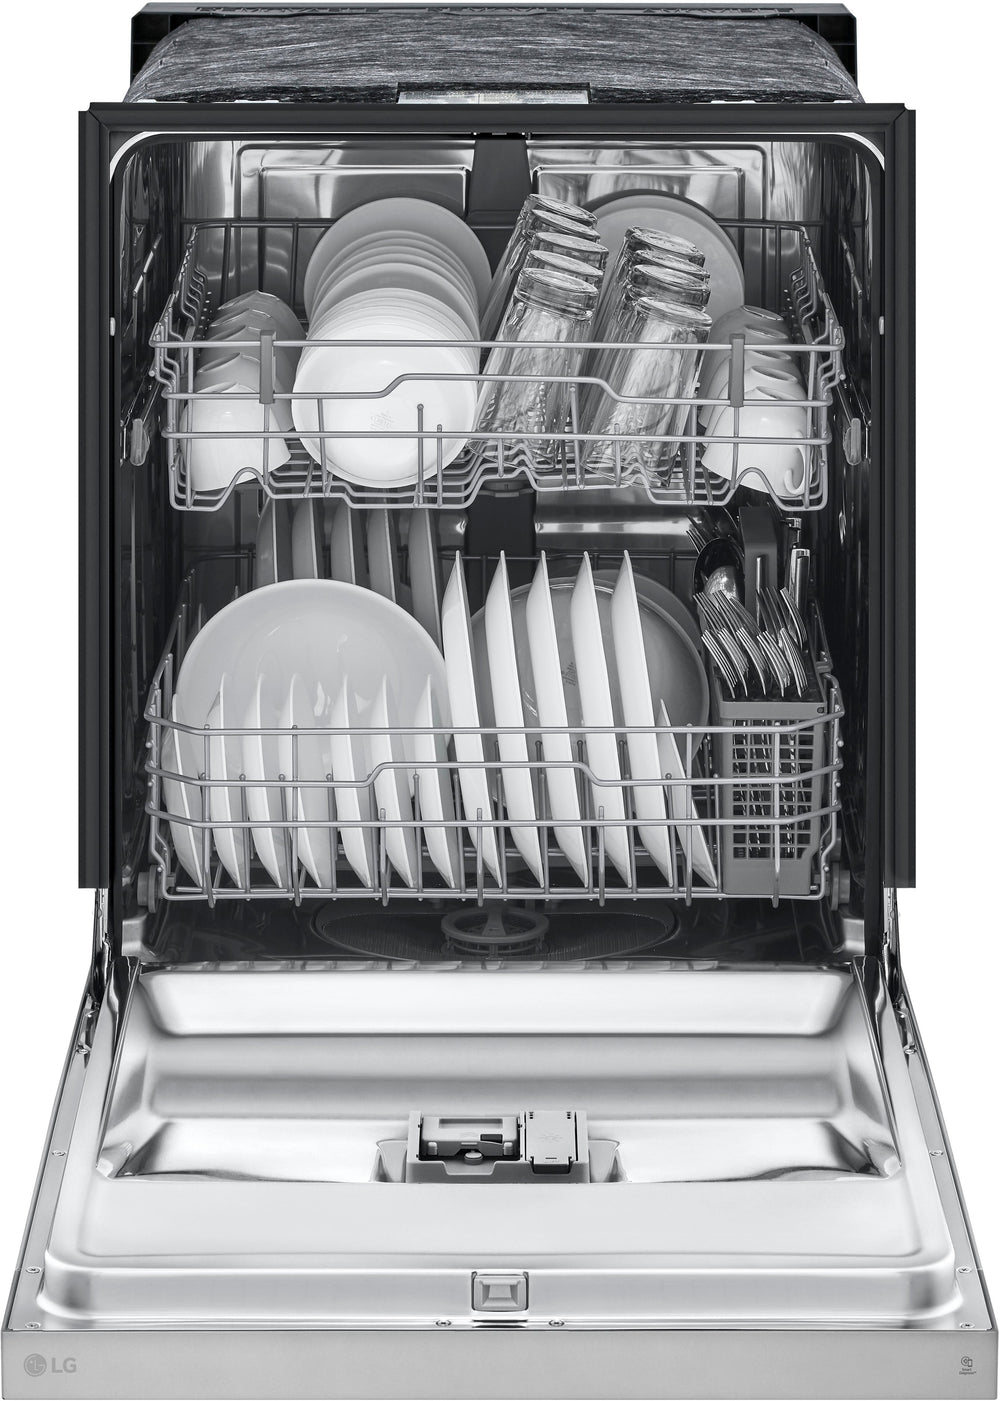 LG - 24" Front Control Built-In Stainless Steel Tub Dishwasher with SenseClean and 52 dBA - Stainless Steel Look_1